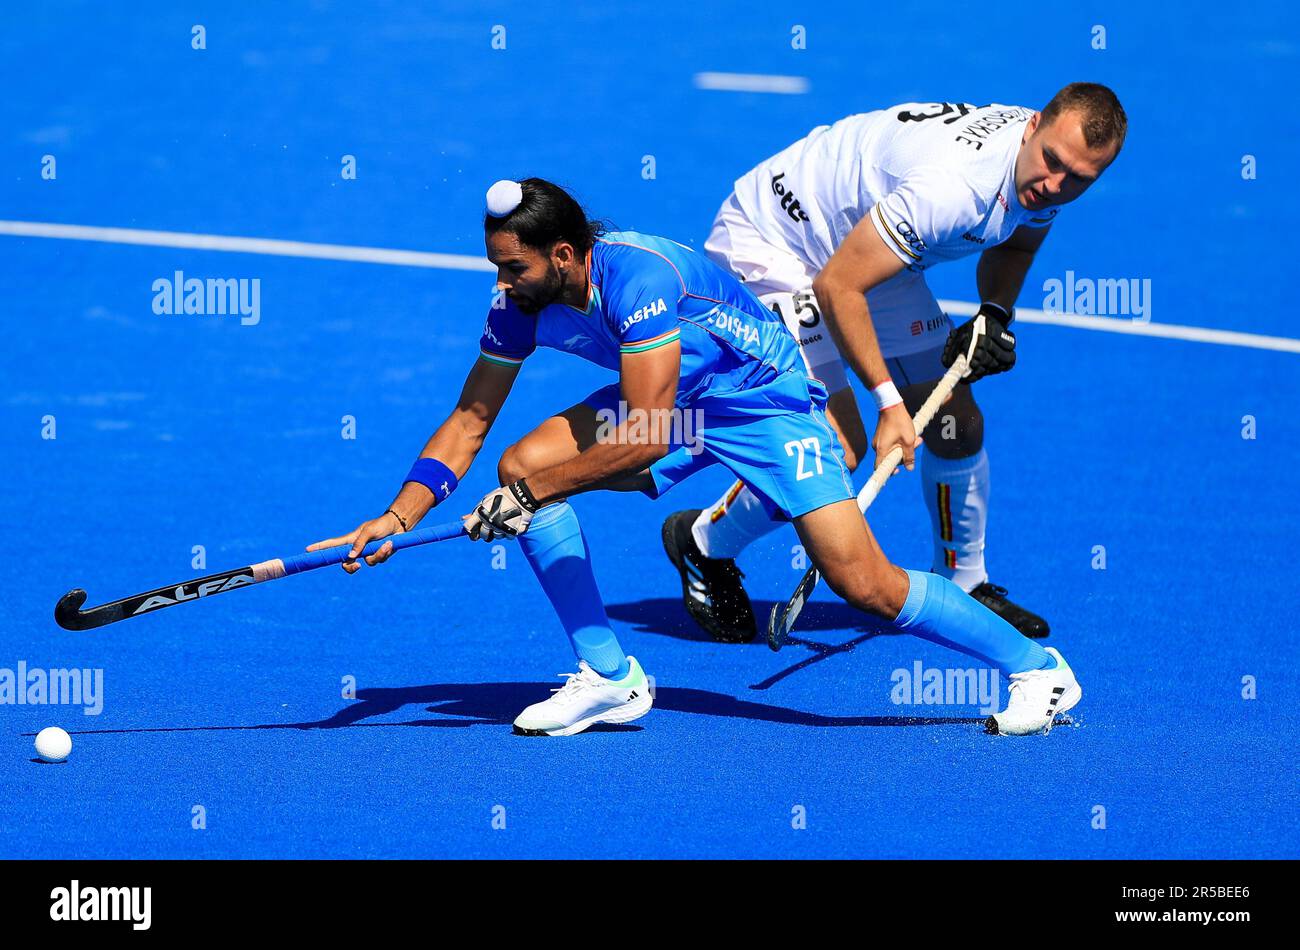 India's Akashdeep Singh gets past Belgium's Emmanuel Stockbroekx during the FIH Hockey Pro League match at Lee Valley, London. Picture date: Friday June 2, 2023. Stock Photo